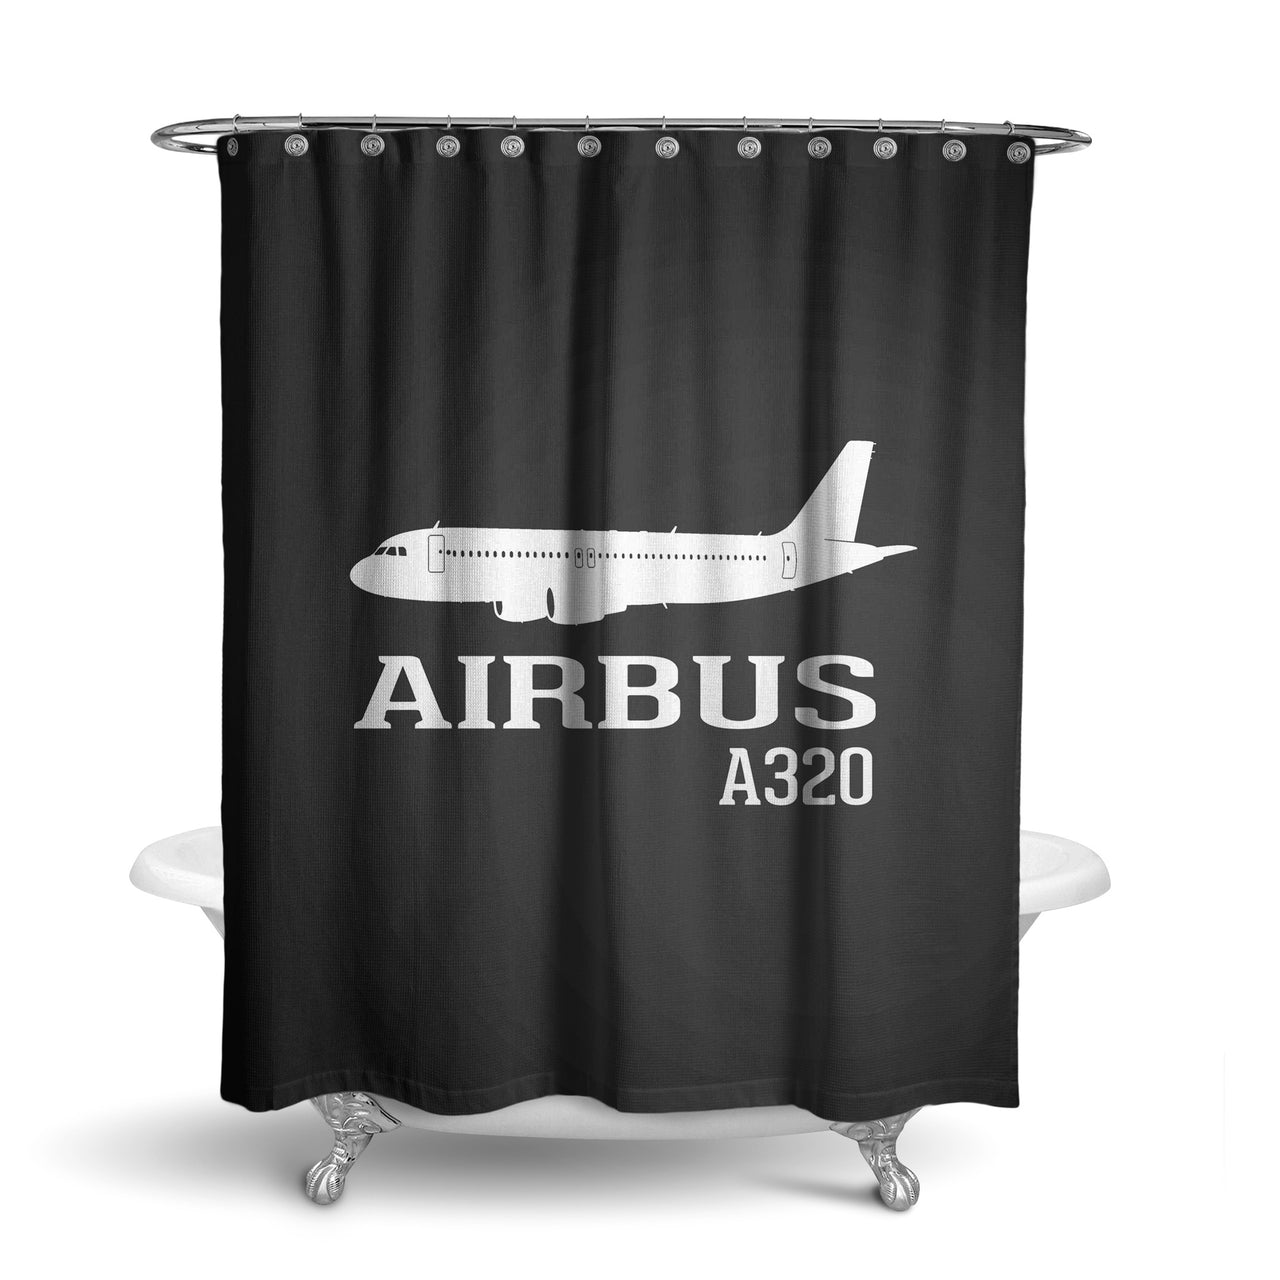 Airbus A320 Printed Designed Shower Curtains